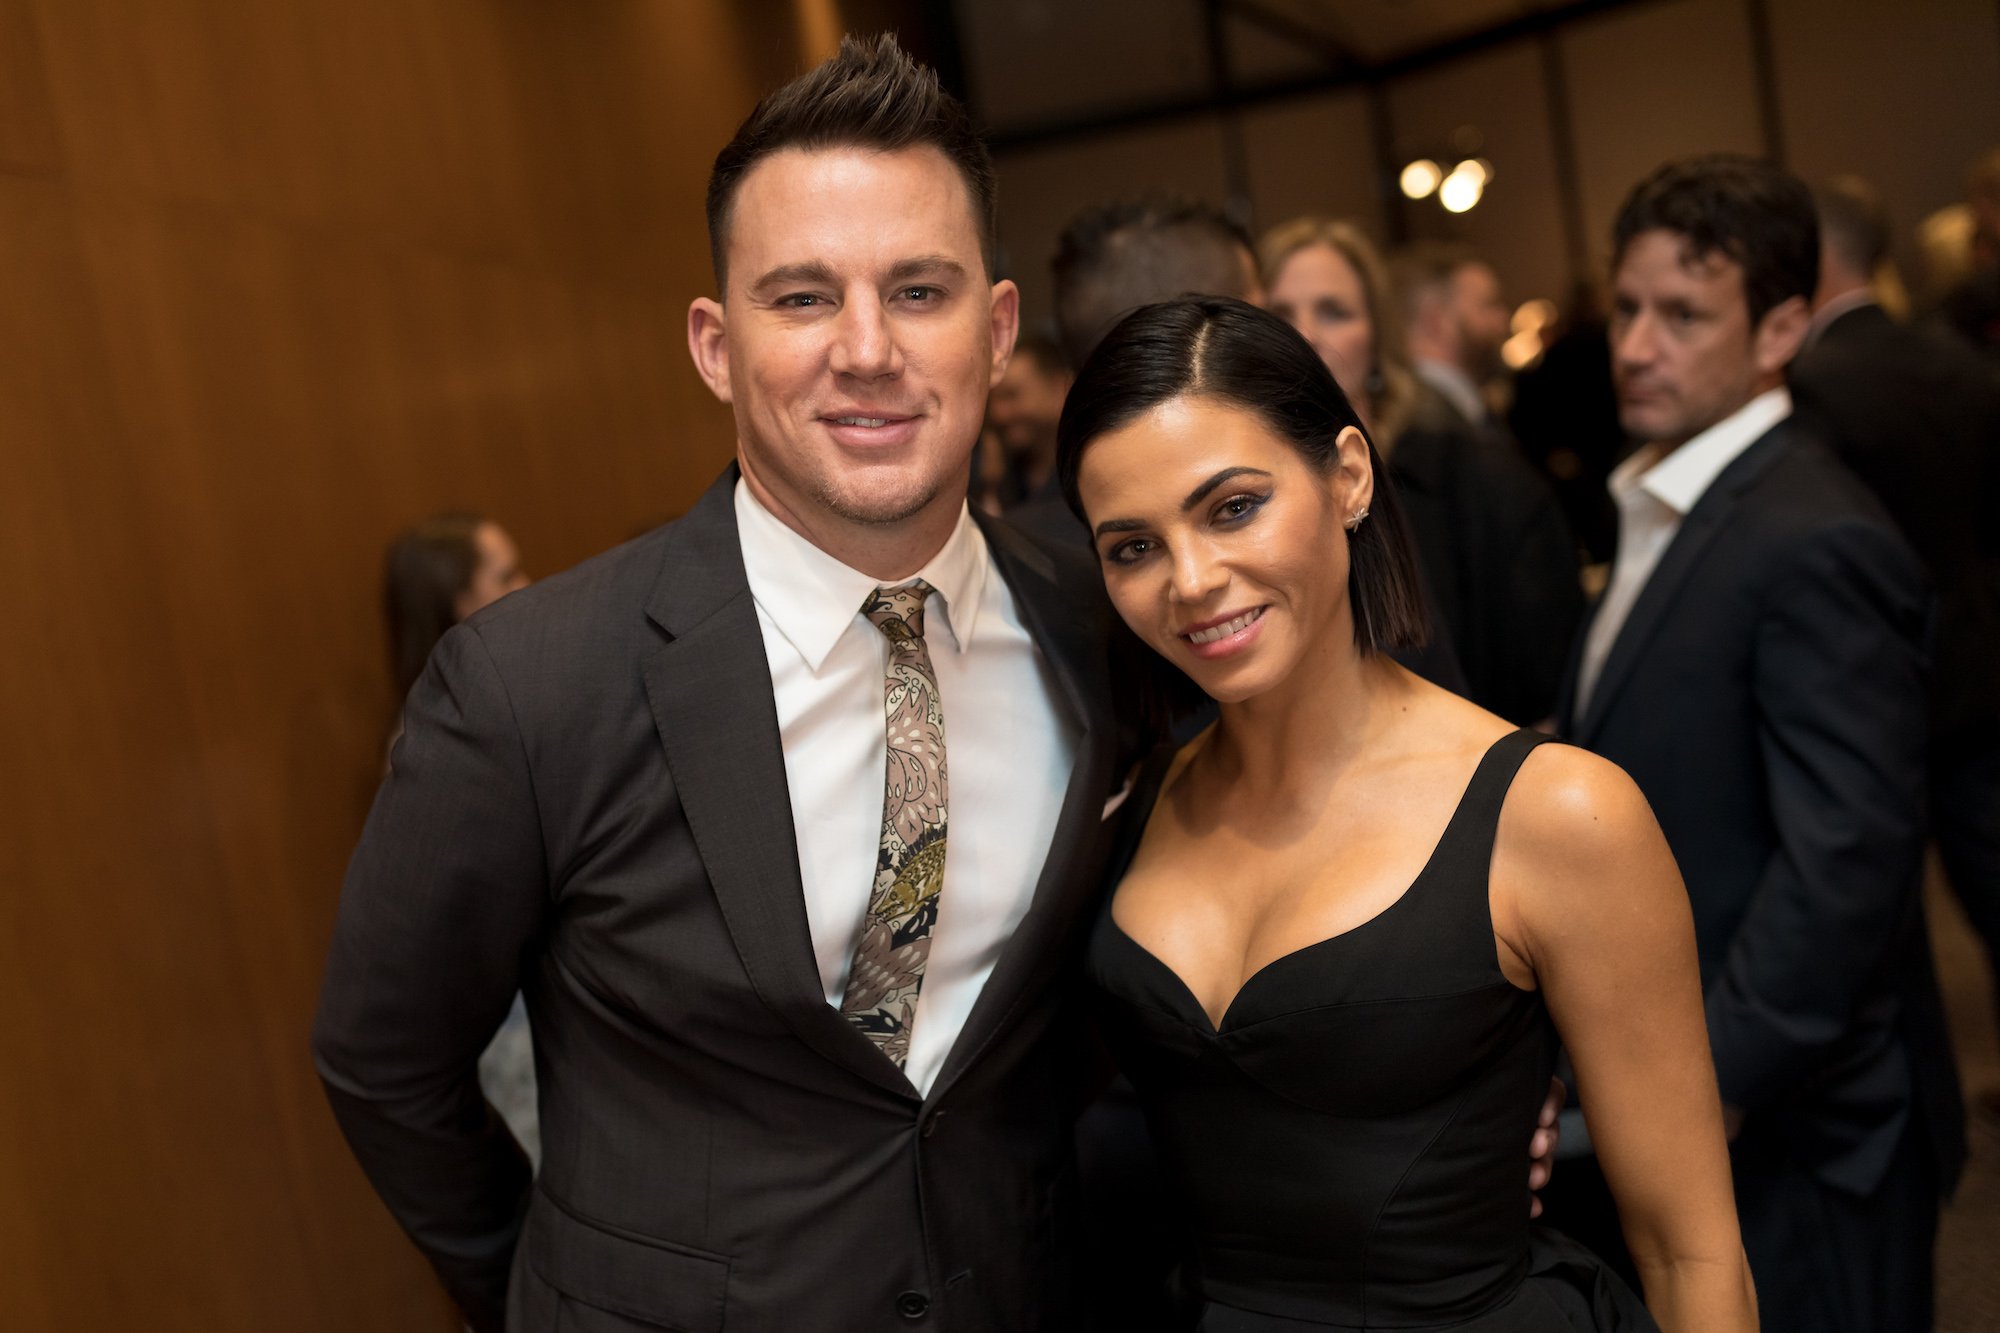 Channing Tatum Once Said He Would Just Lay There When Having Sex With Ex Jenna Dewan